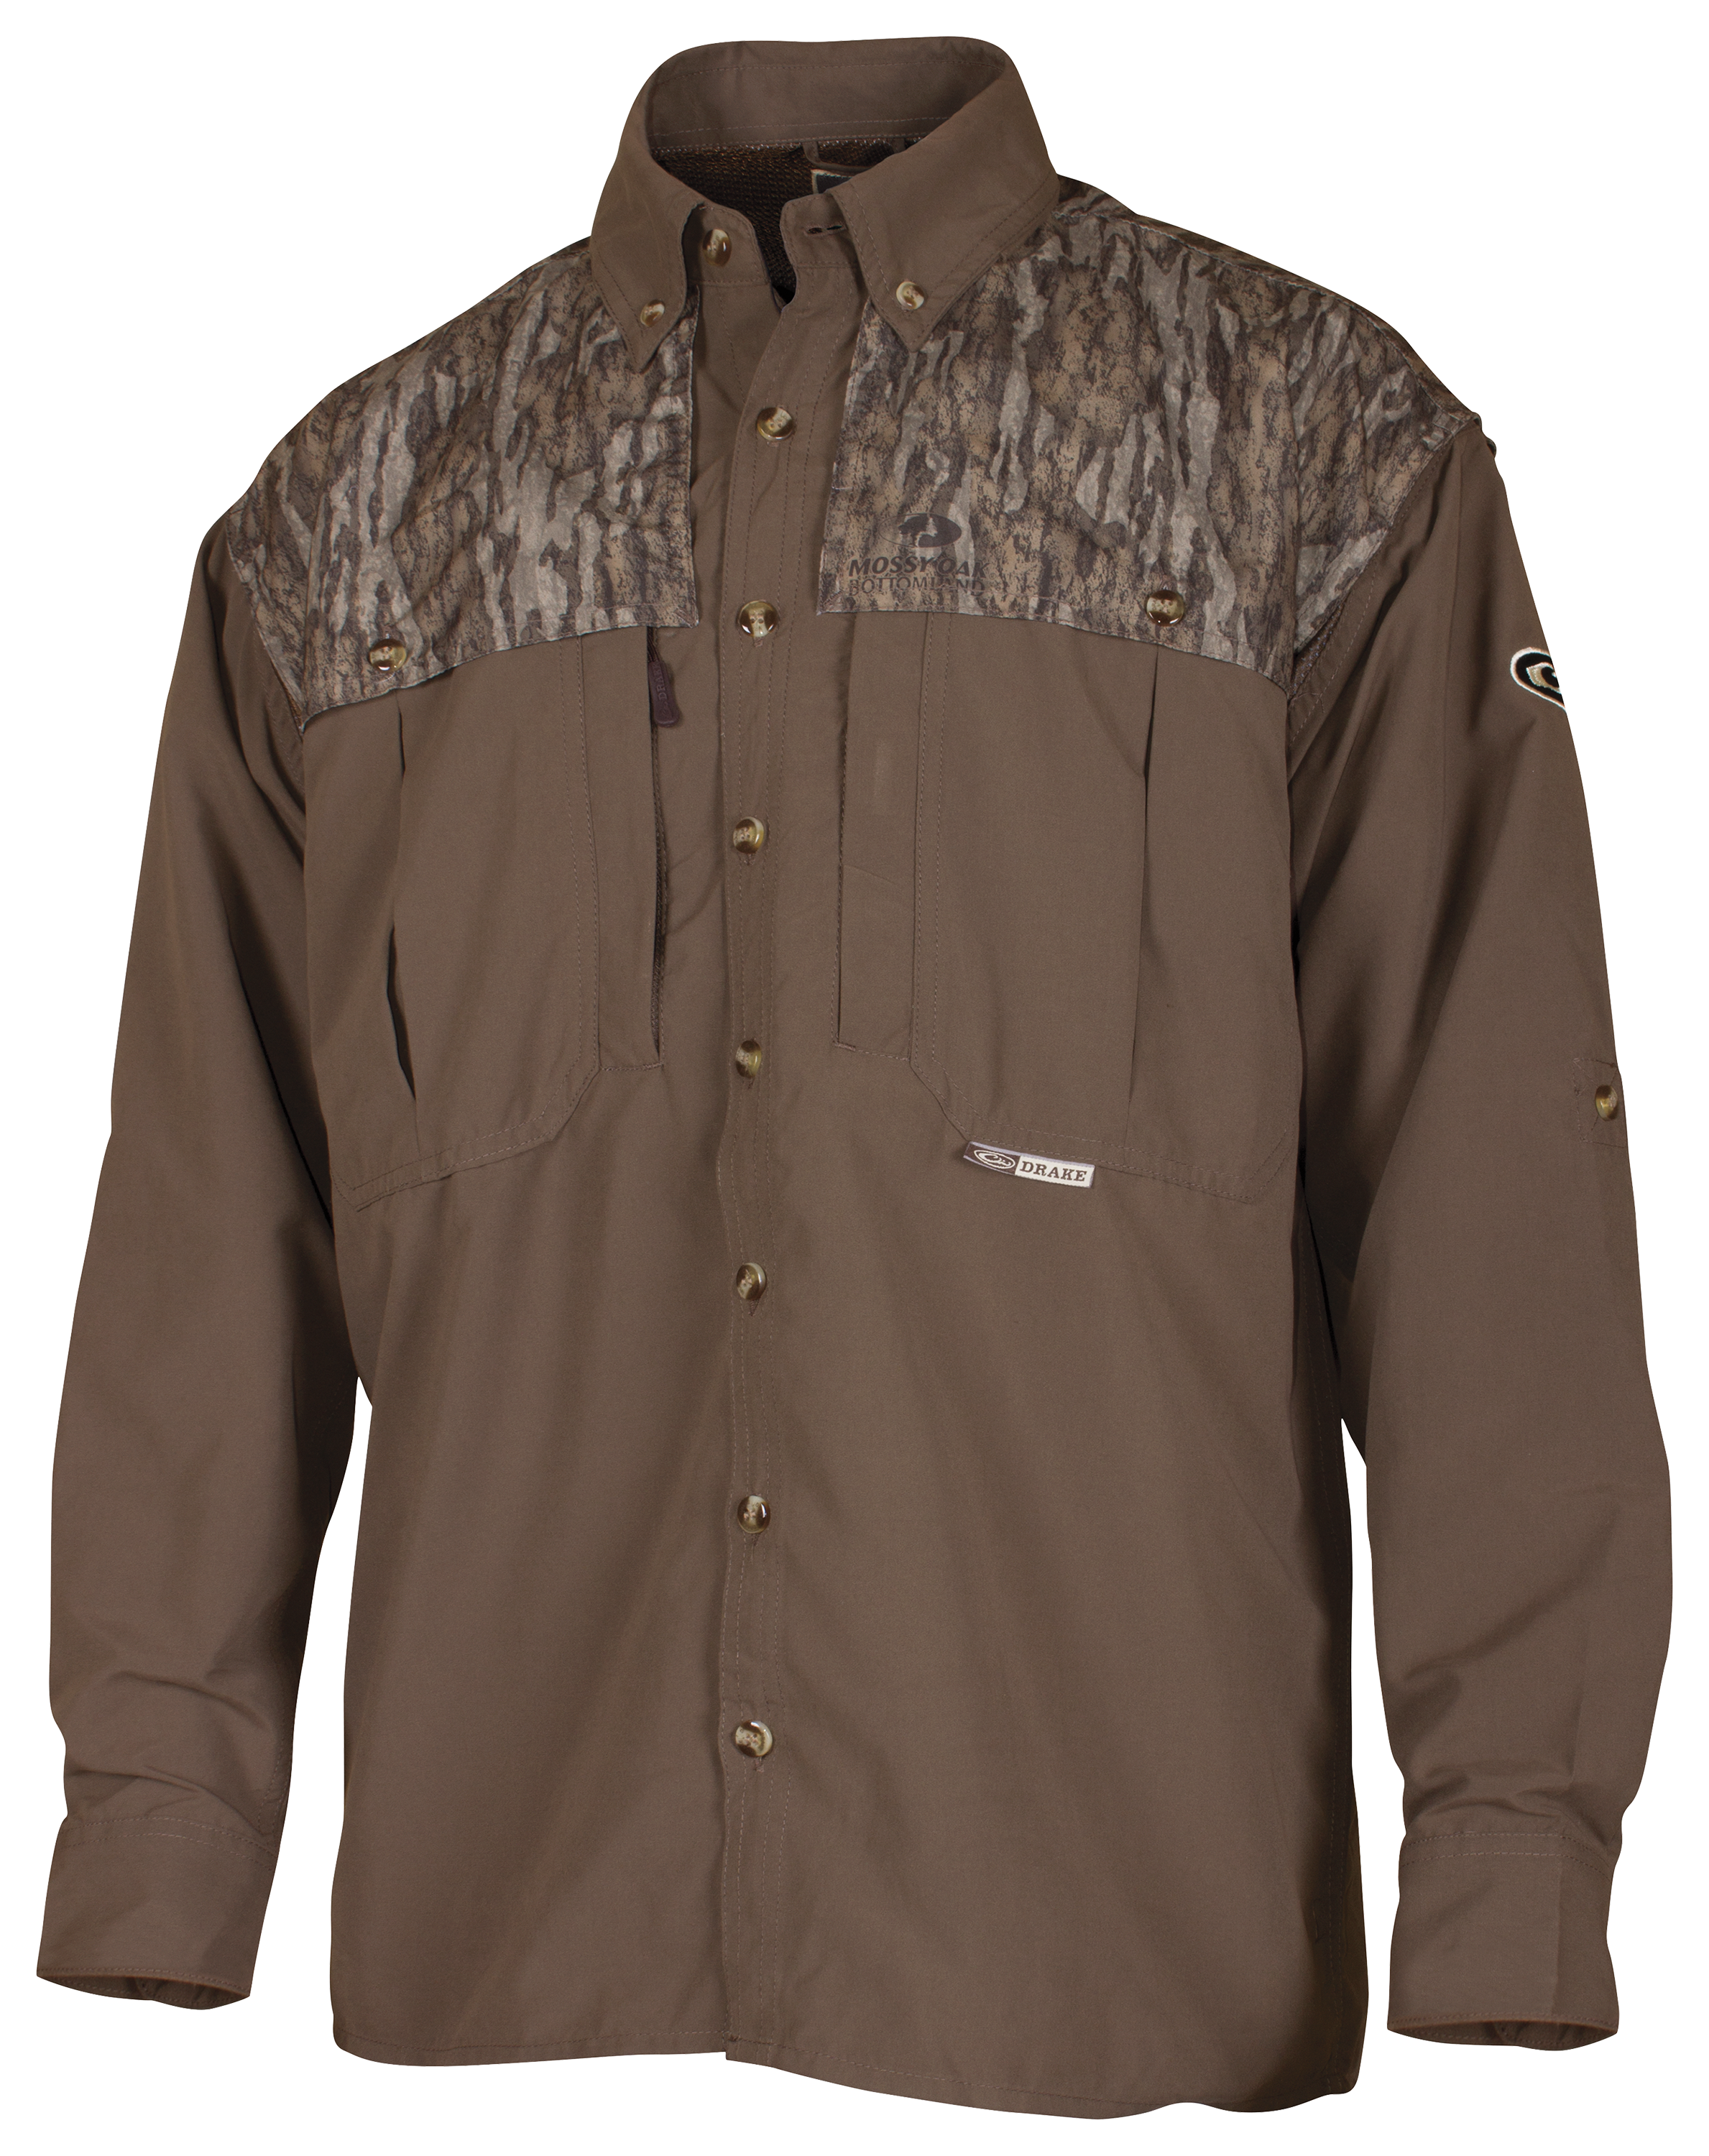 Drake Waterfowl Systems 2-Toned Vented Wingshooter's Shirt for Men